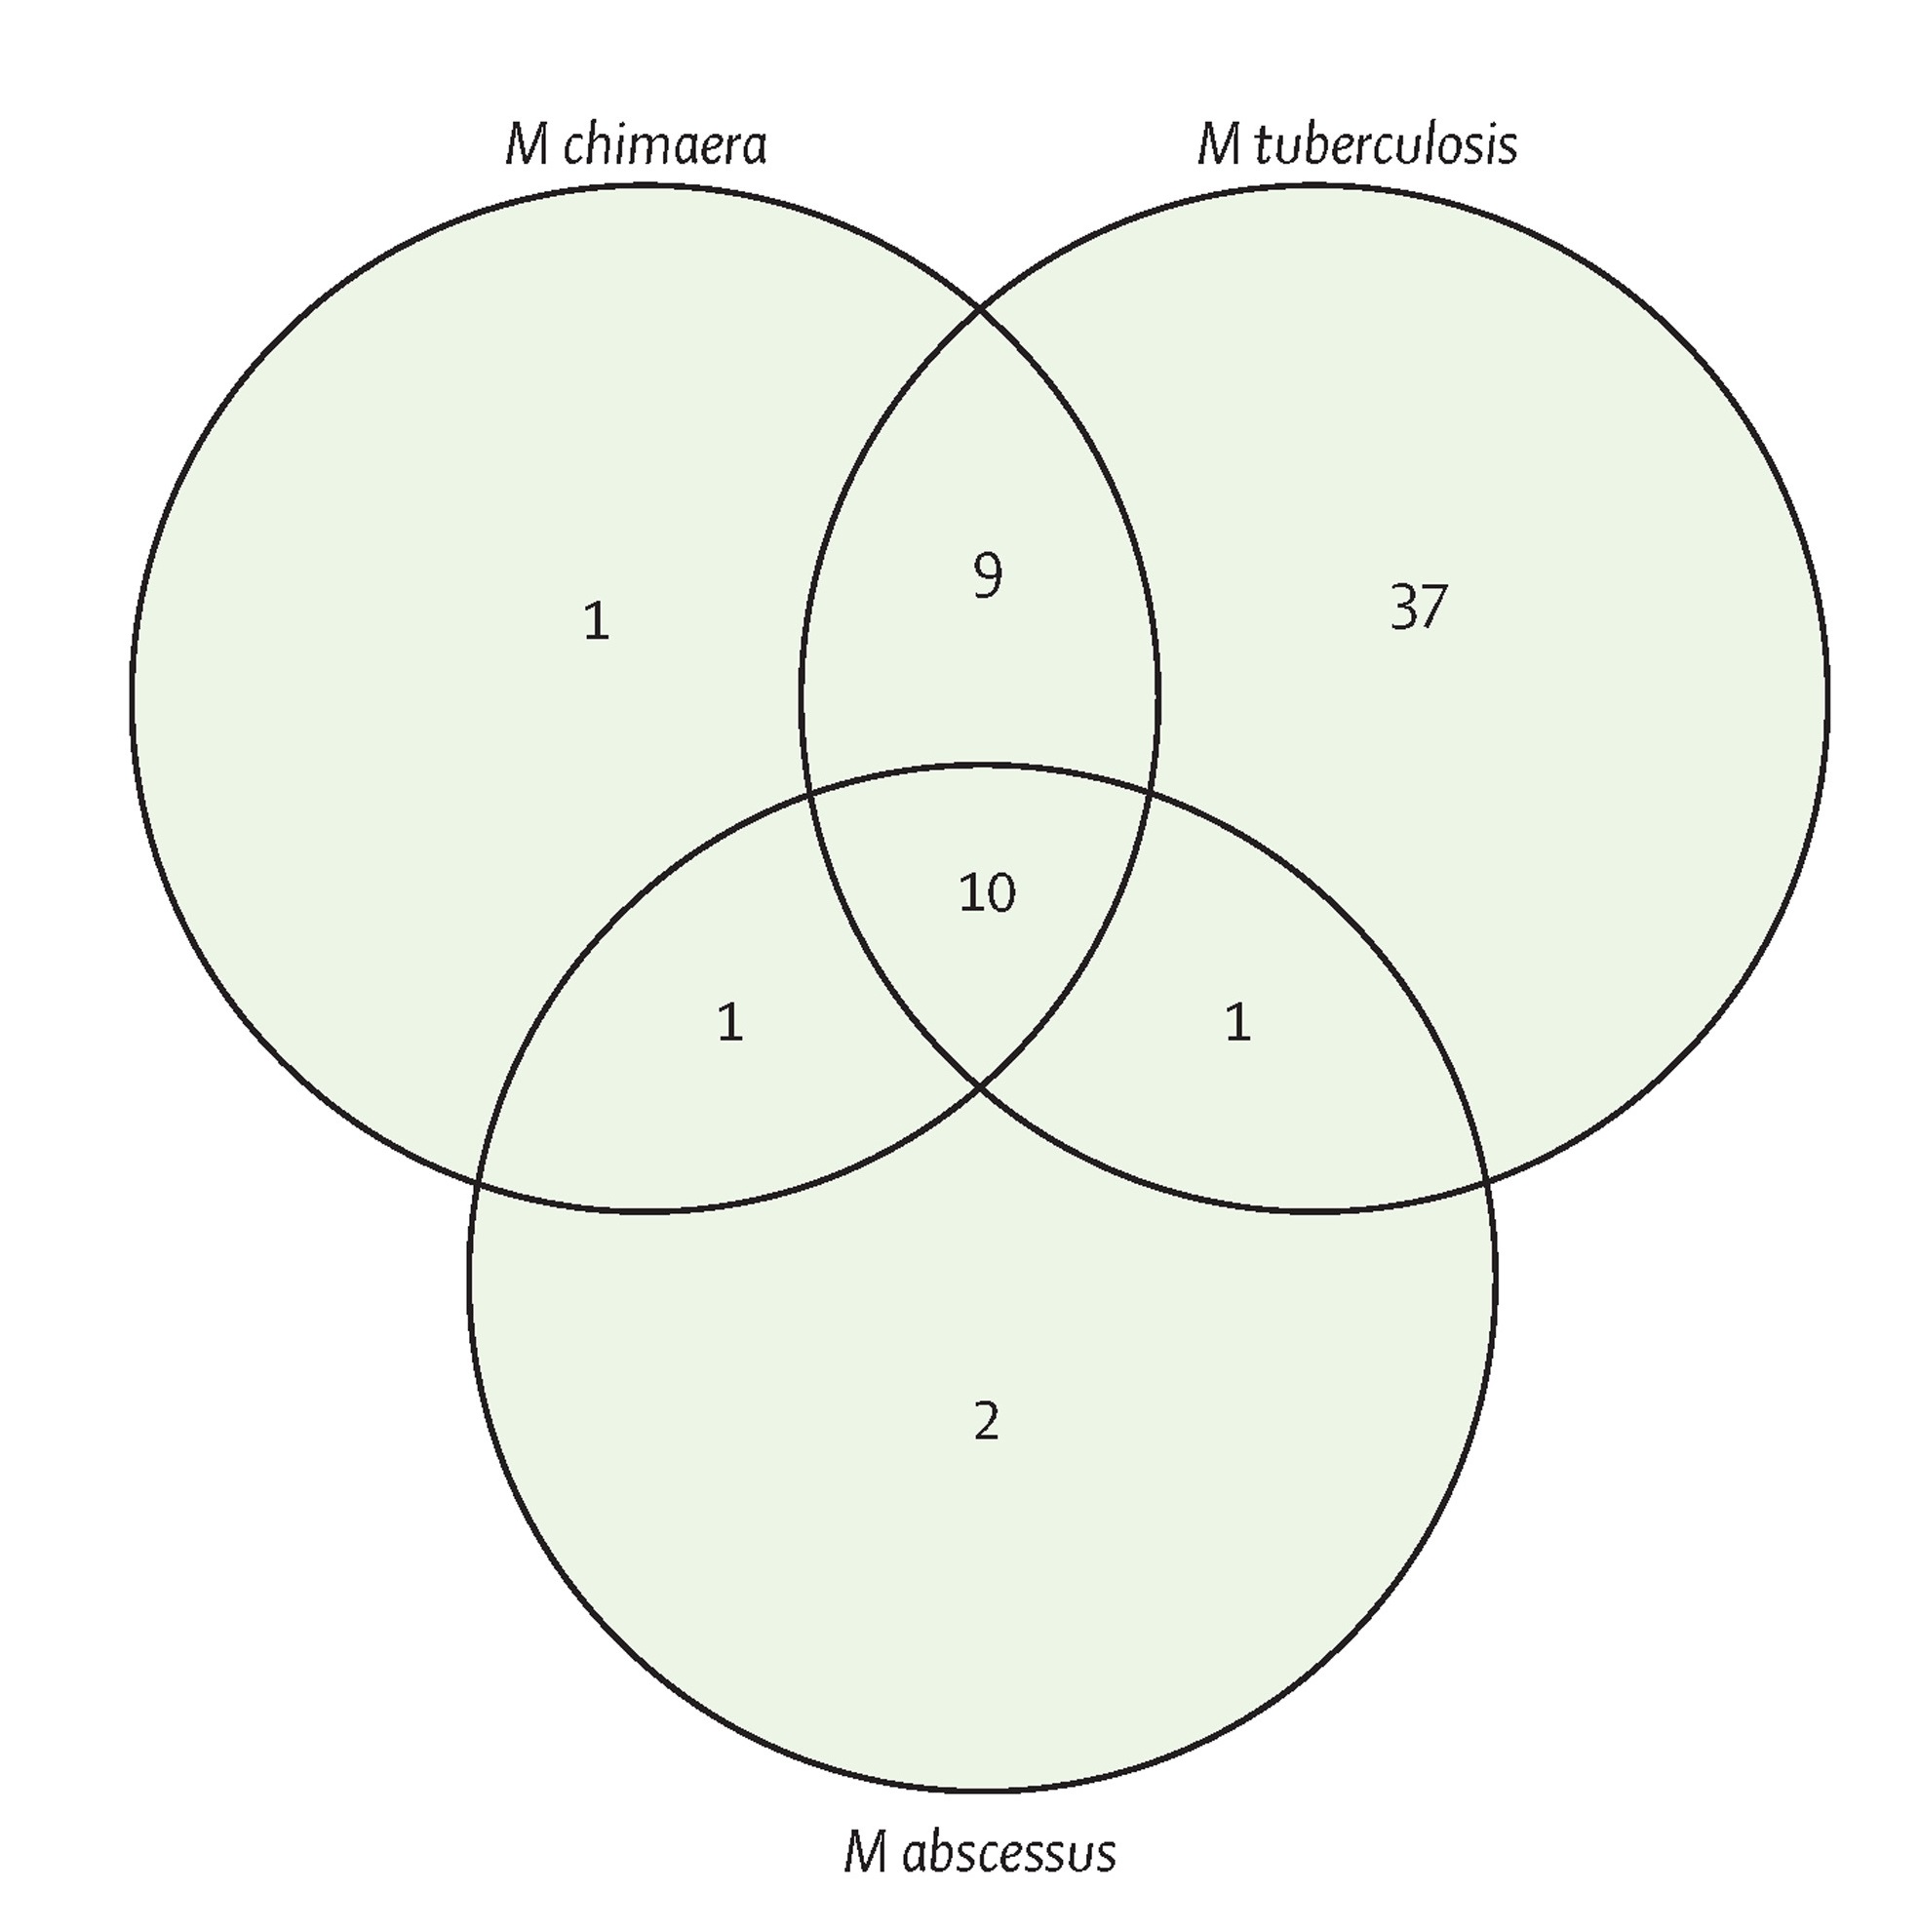 Venn diagram describing the overlap in antimicrobial compound hits against M chimaera, M abscessus, and M tuberculosis. 